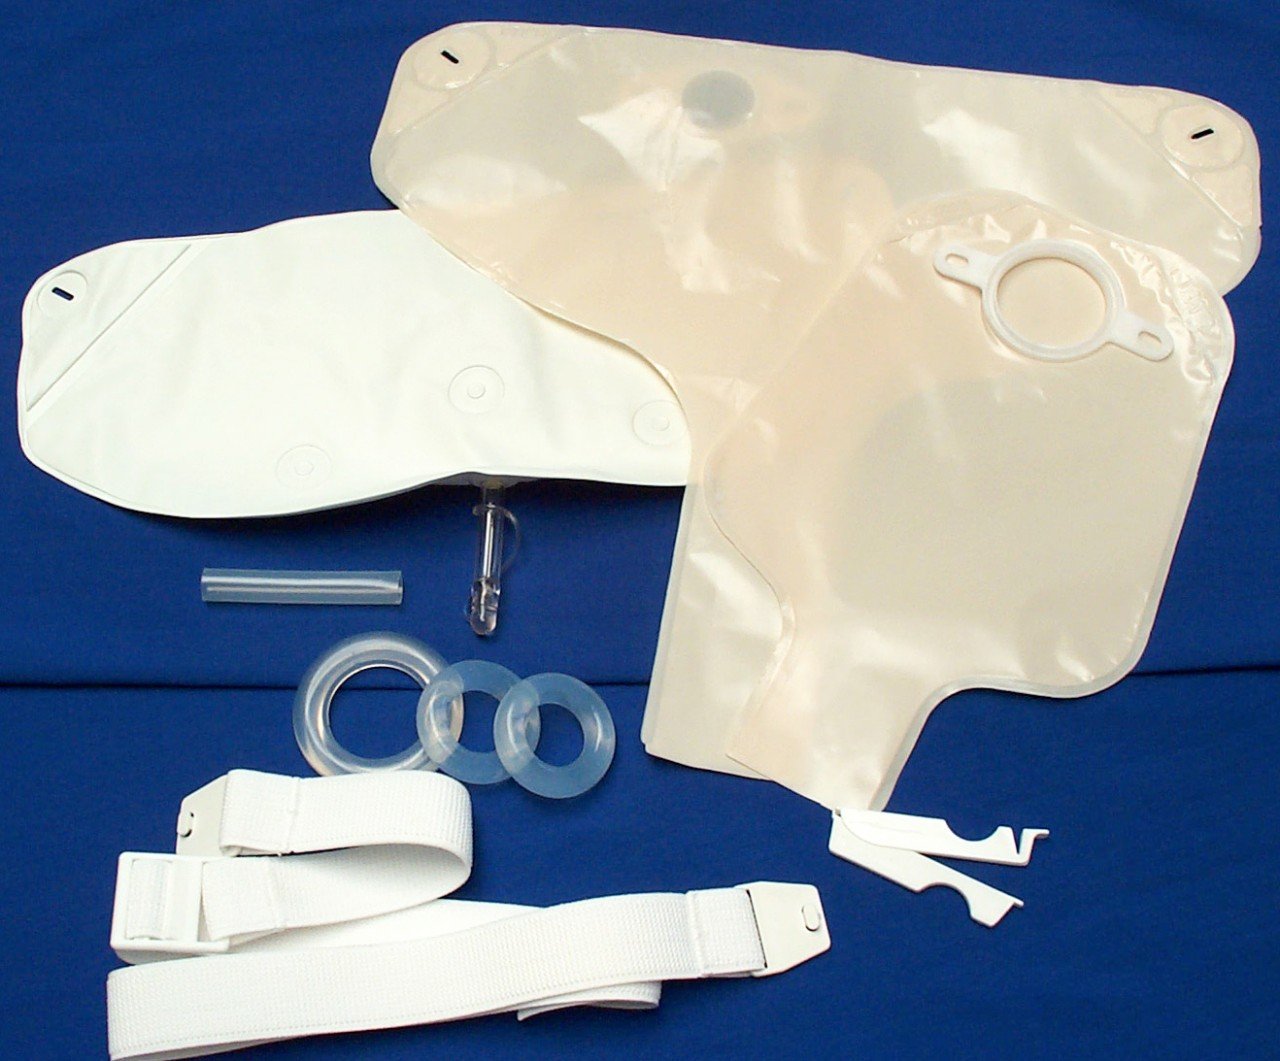 NUH EV8050-0S3 BX/10 NON-ADHESIVE COLOSTOMY POUCH KIT